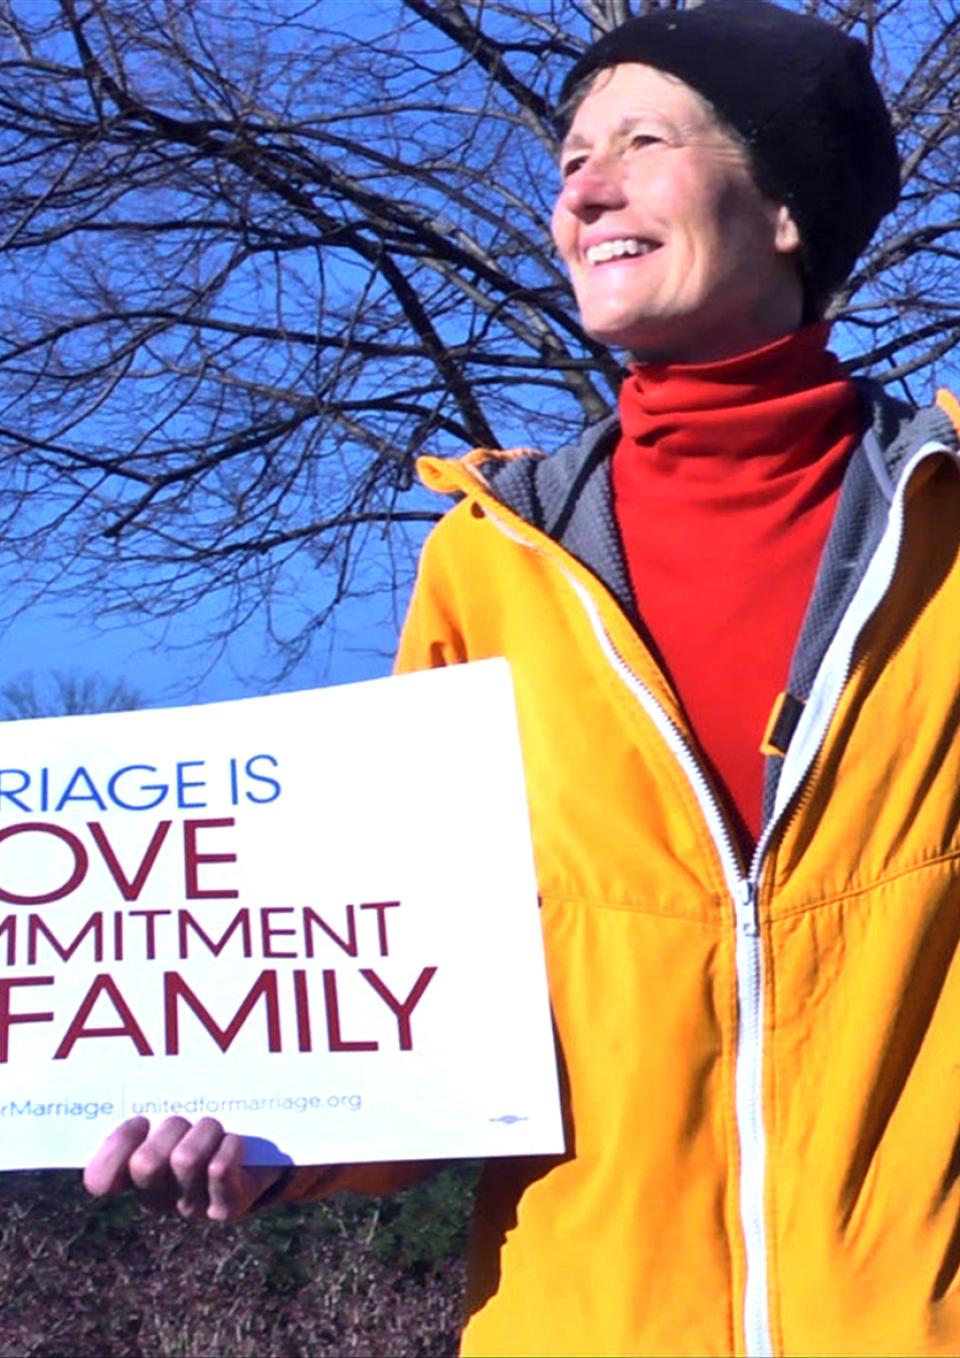 A white woman stands outside in front of a bare tree with blue sky. She smiles broadly, looking to the side. She is holding a white sign that reads “Marriage is Love, Commitment, Family” in blue and purple text. She wears a bright yellow zip up jacket which is half-unzipped to reveal a bright red turtleneck underneath and a black beanie on her head.